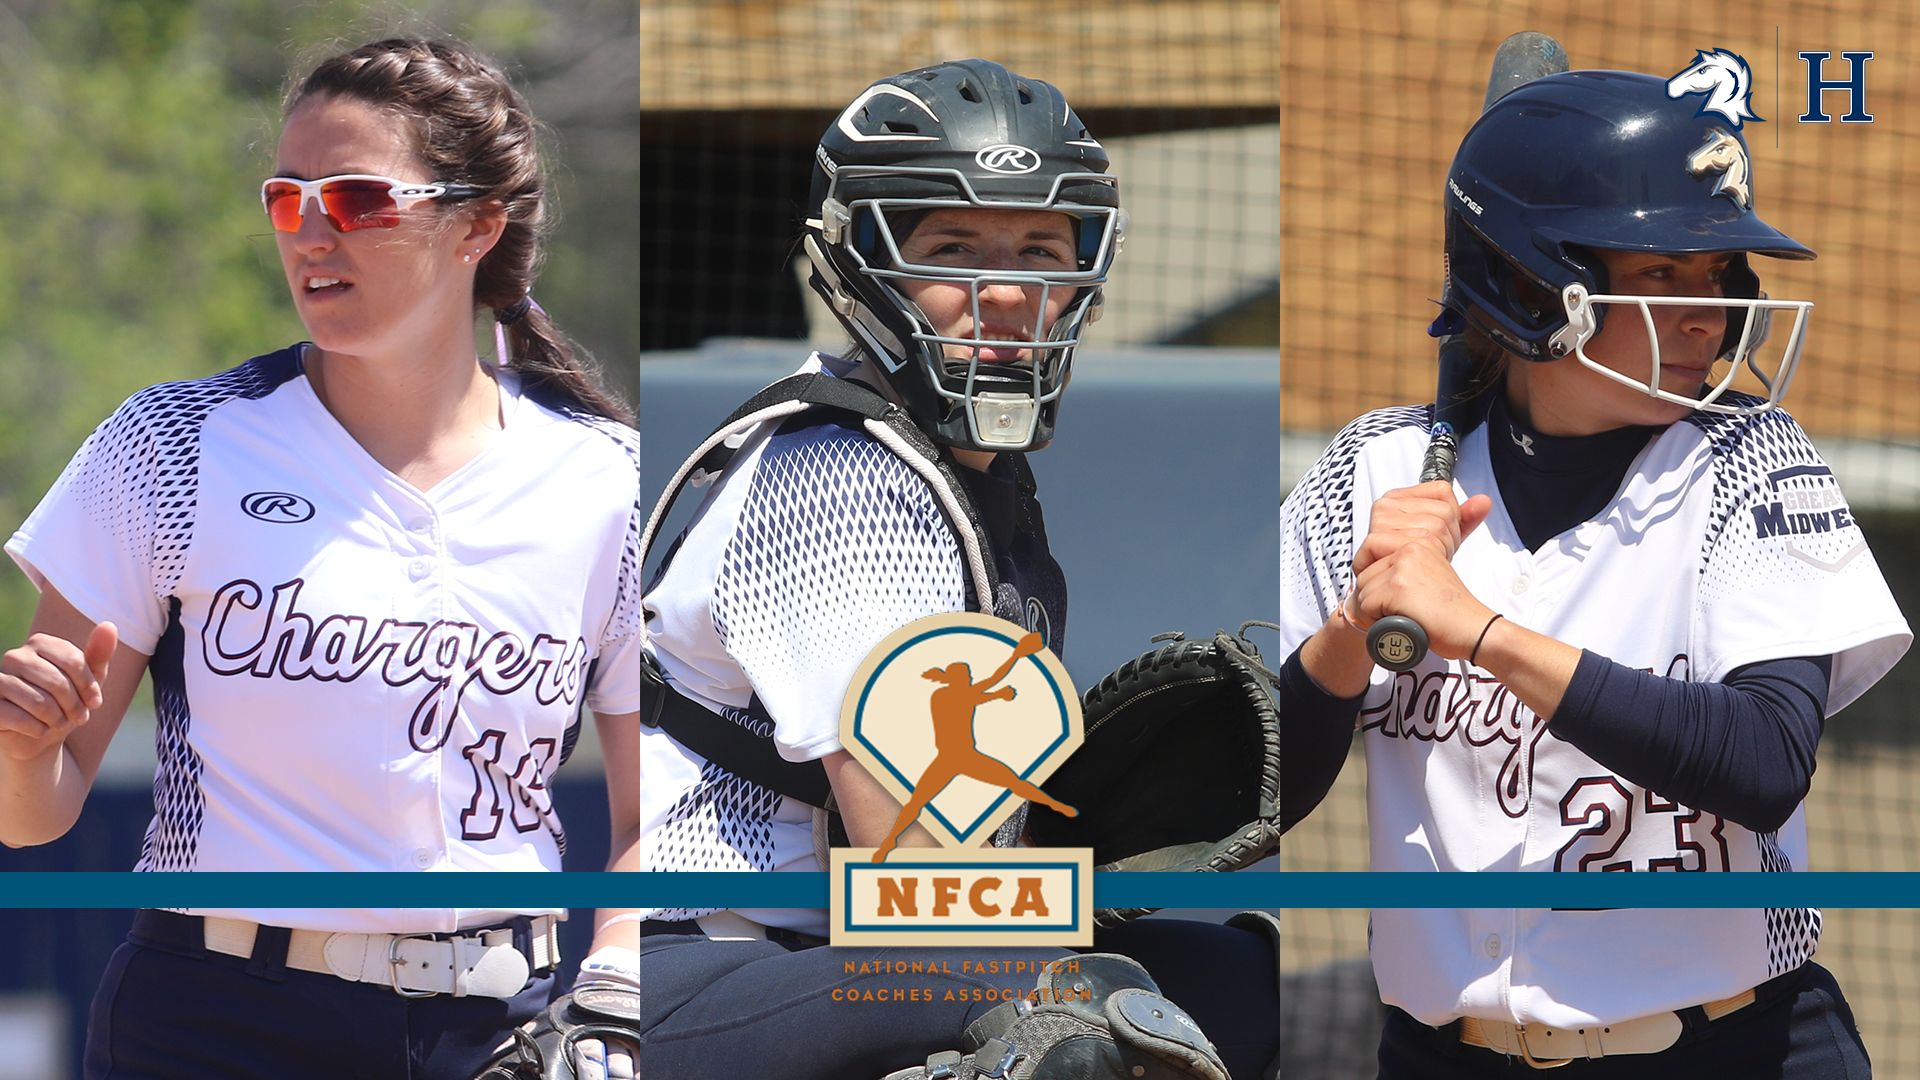 Catron named first-team All-Region by NFCA; two Chargers make second team